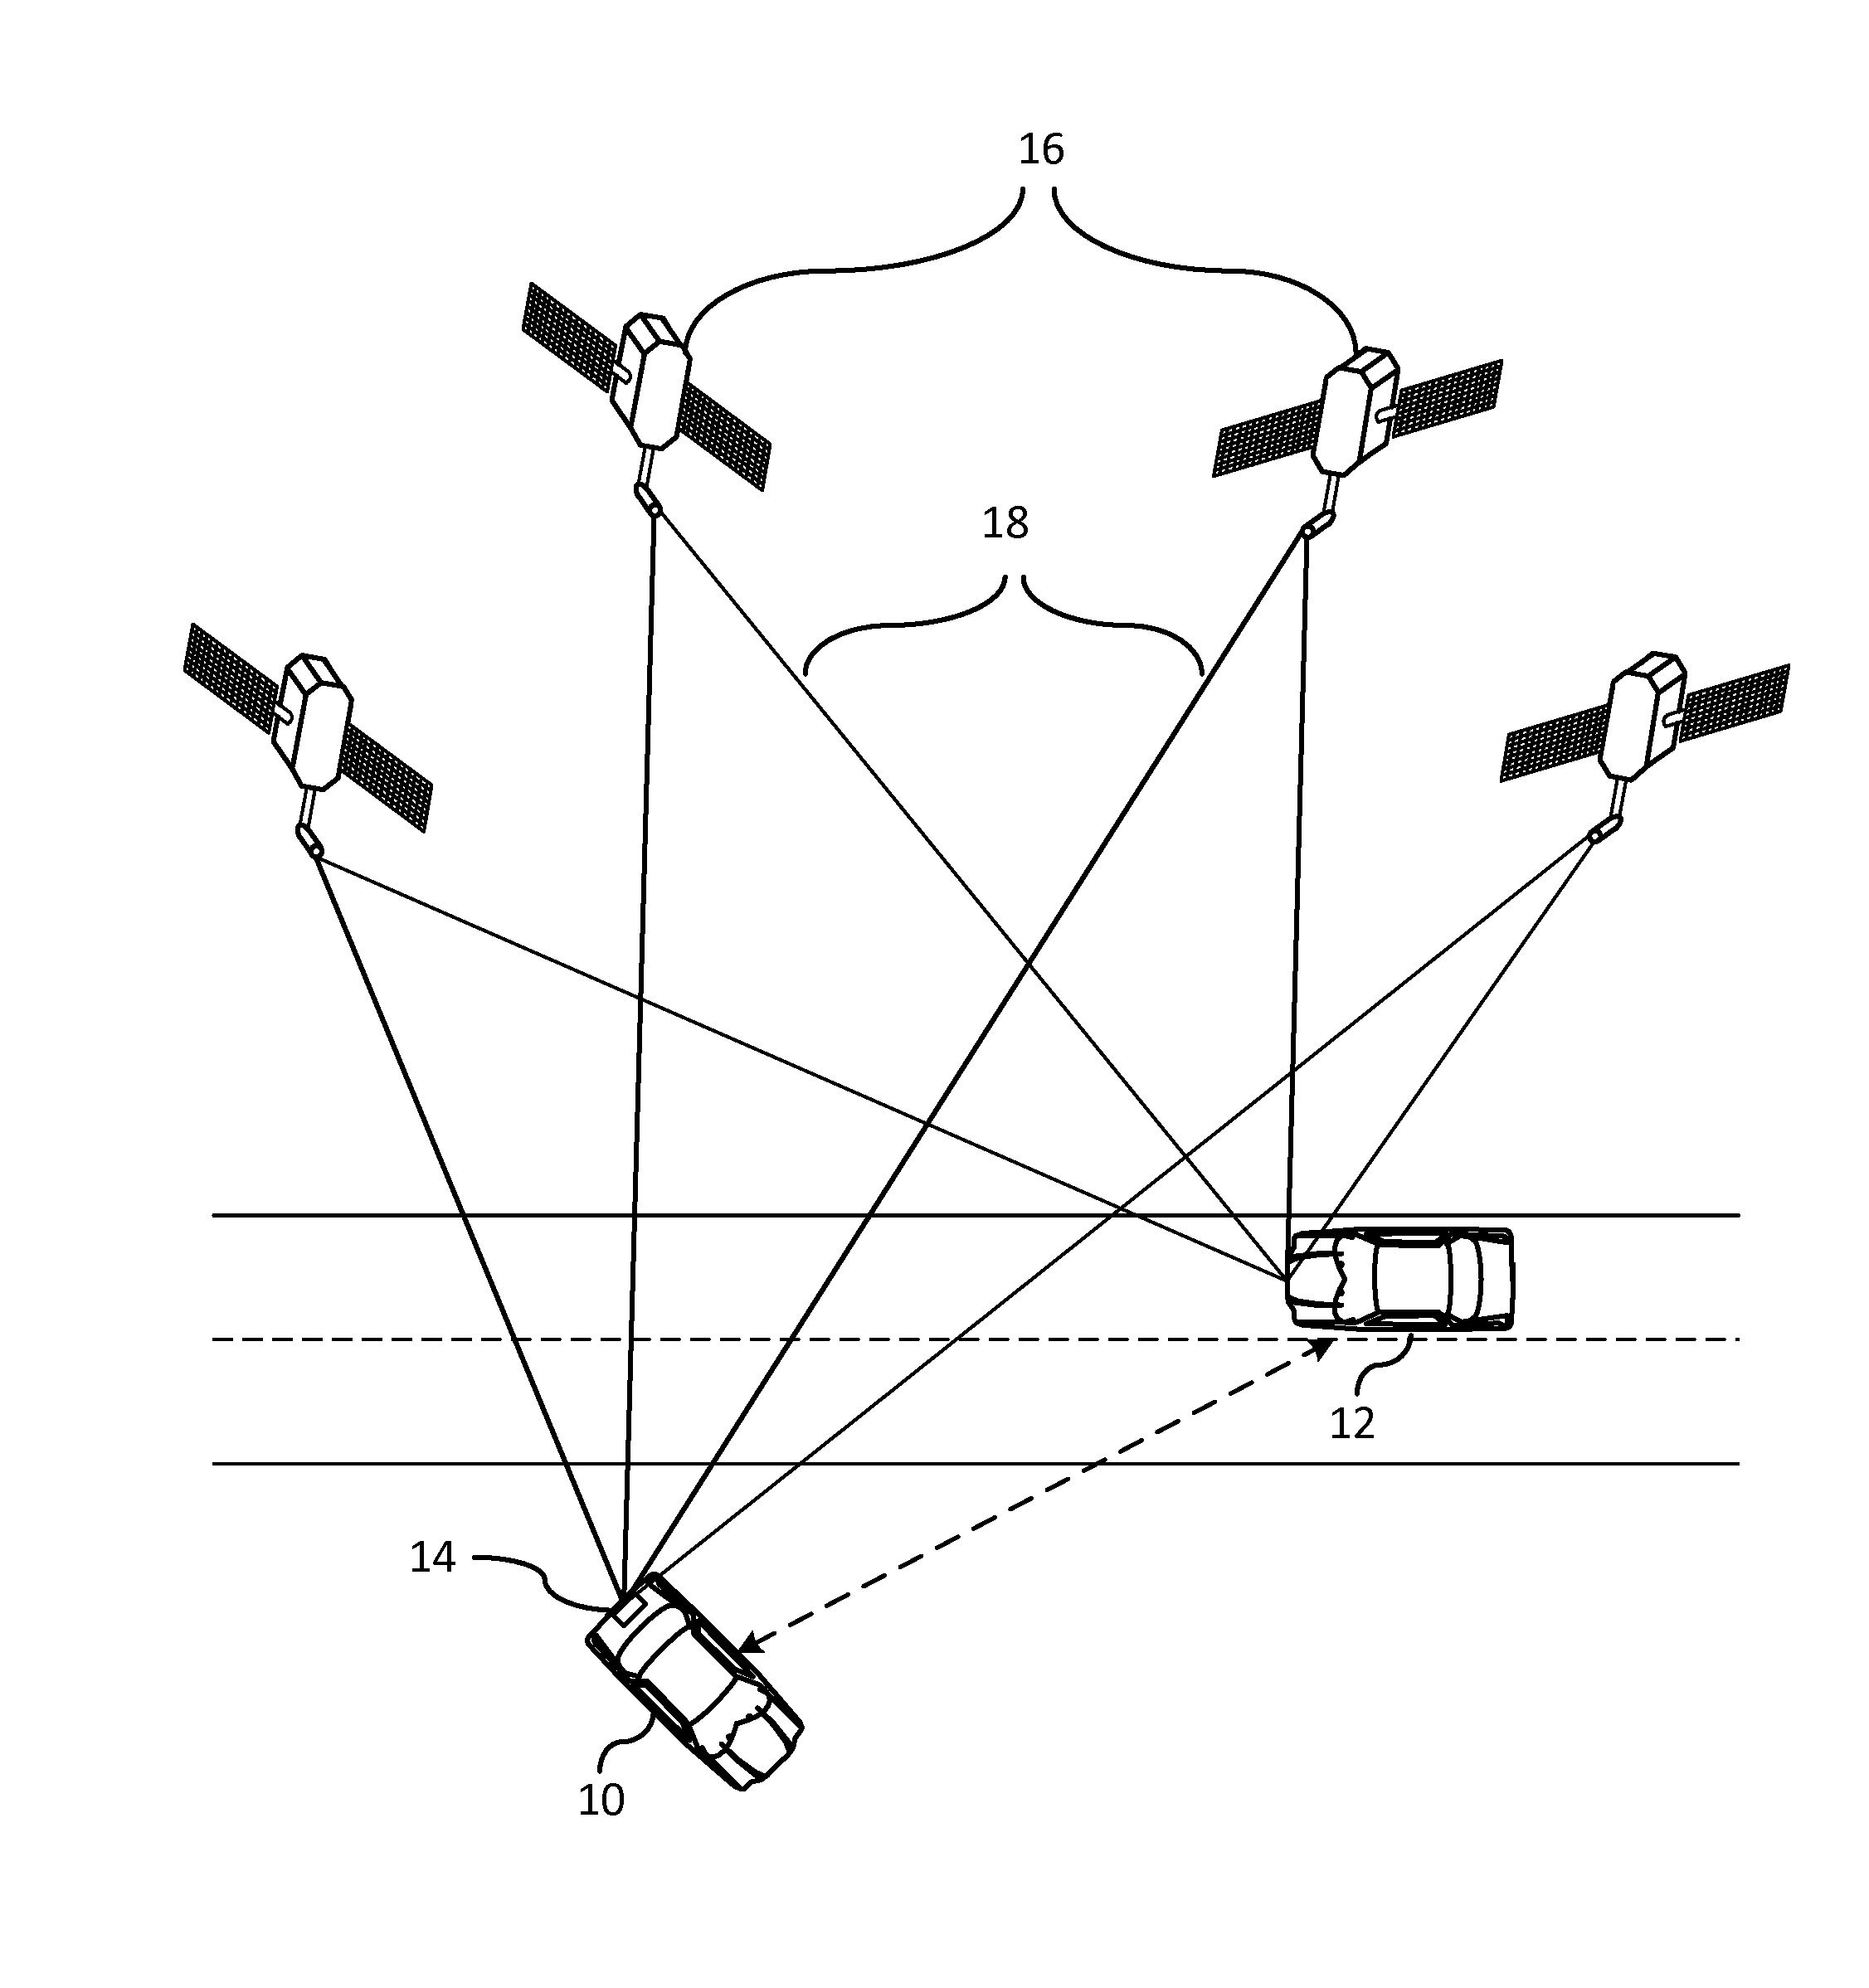 AD-HOC differential GPS referencing using parked vehicles